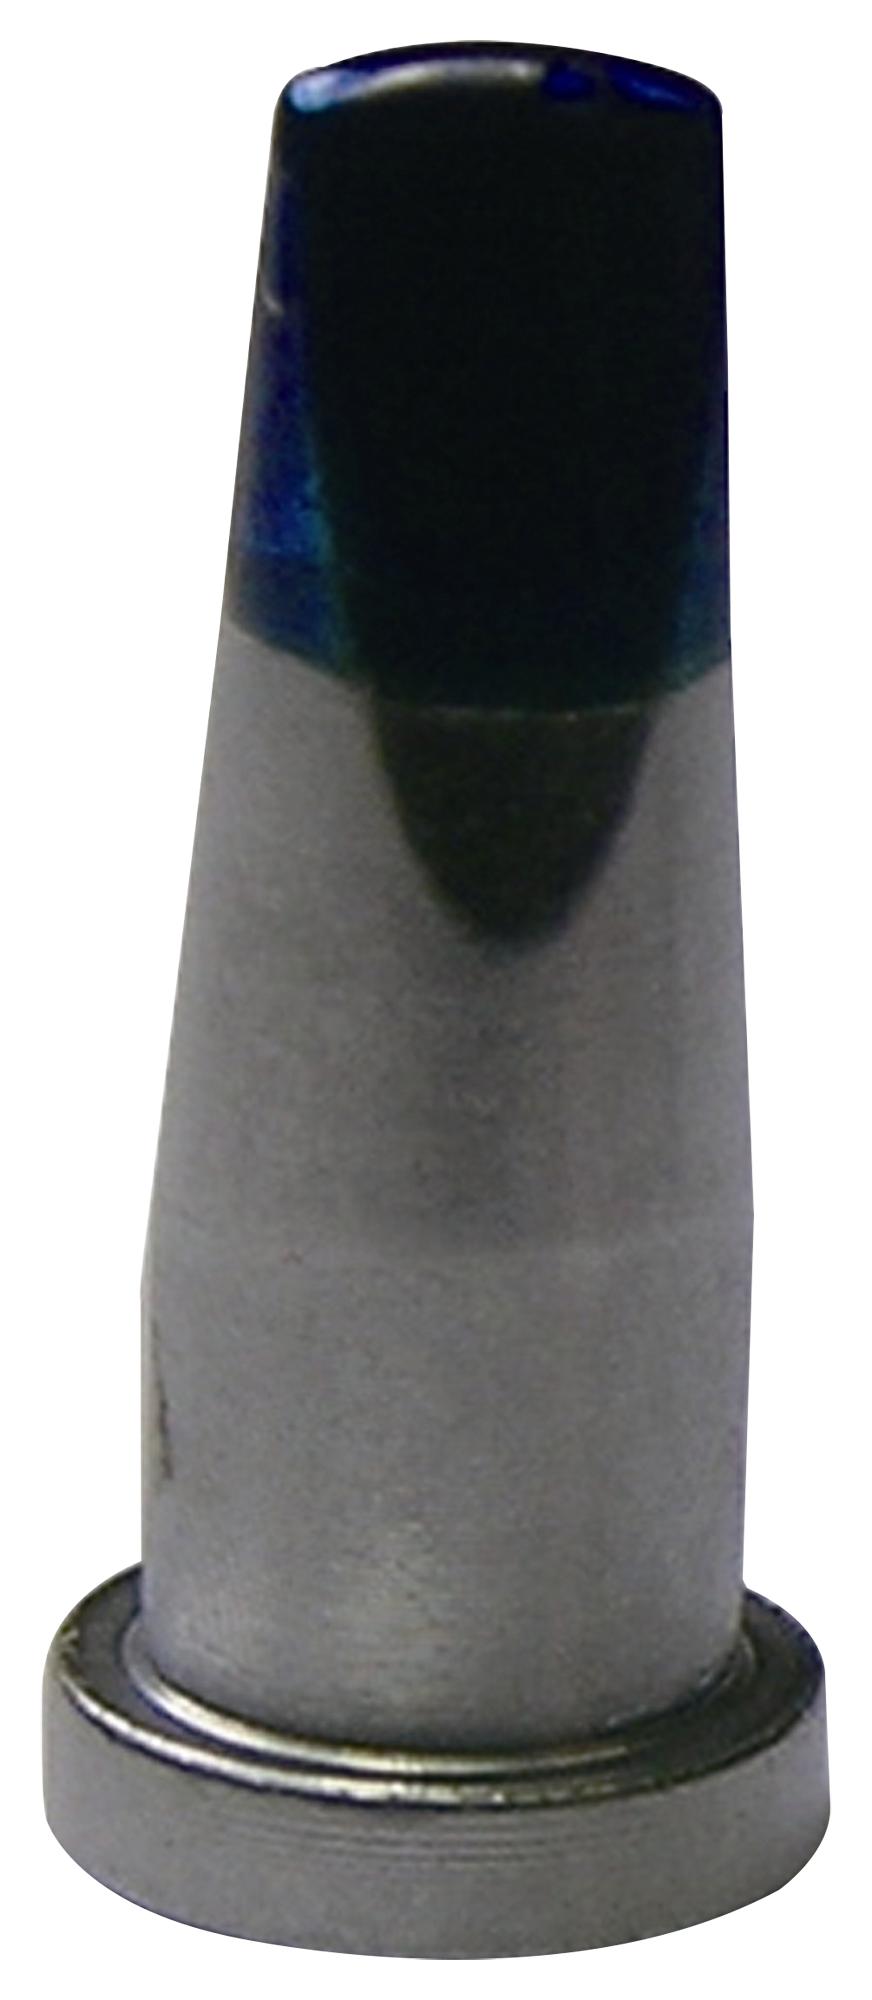 AT800-3.2-CLF SOLDERING TIP, CHISEL, 3.2MM TENMA